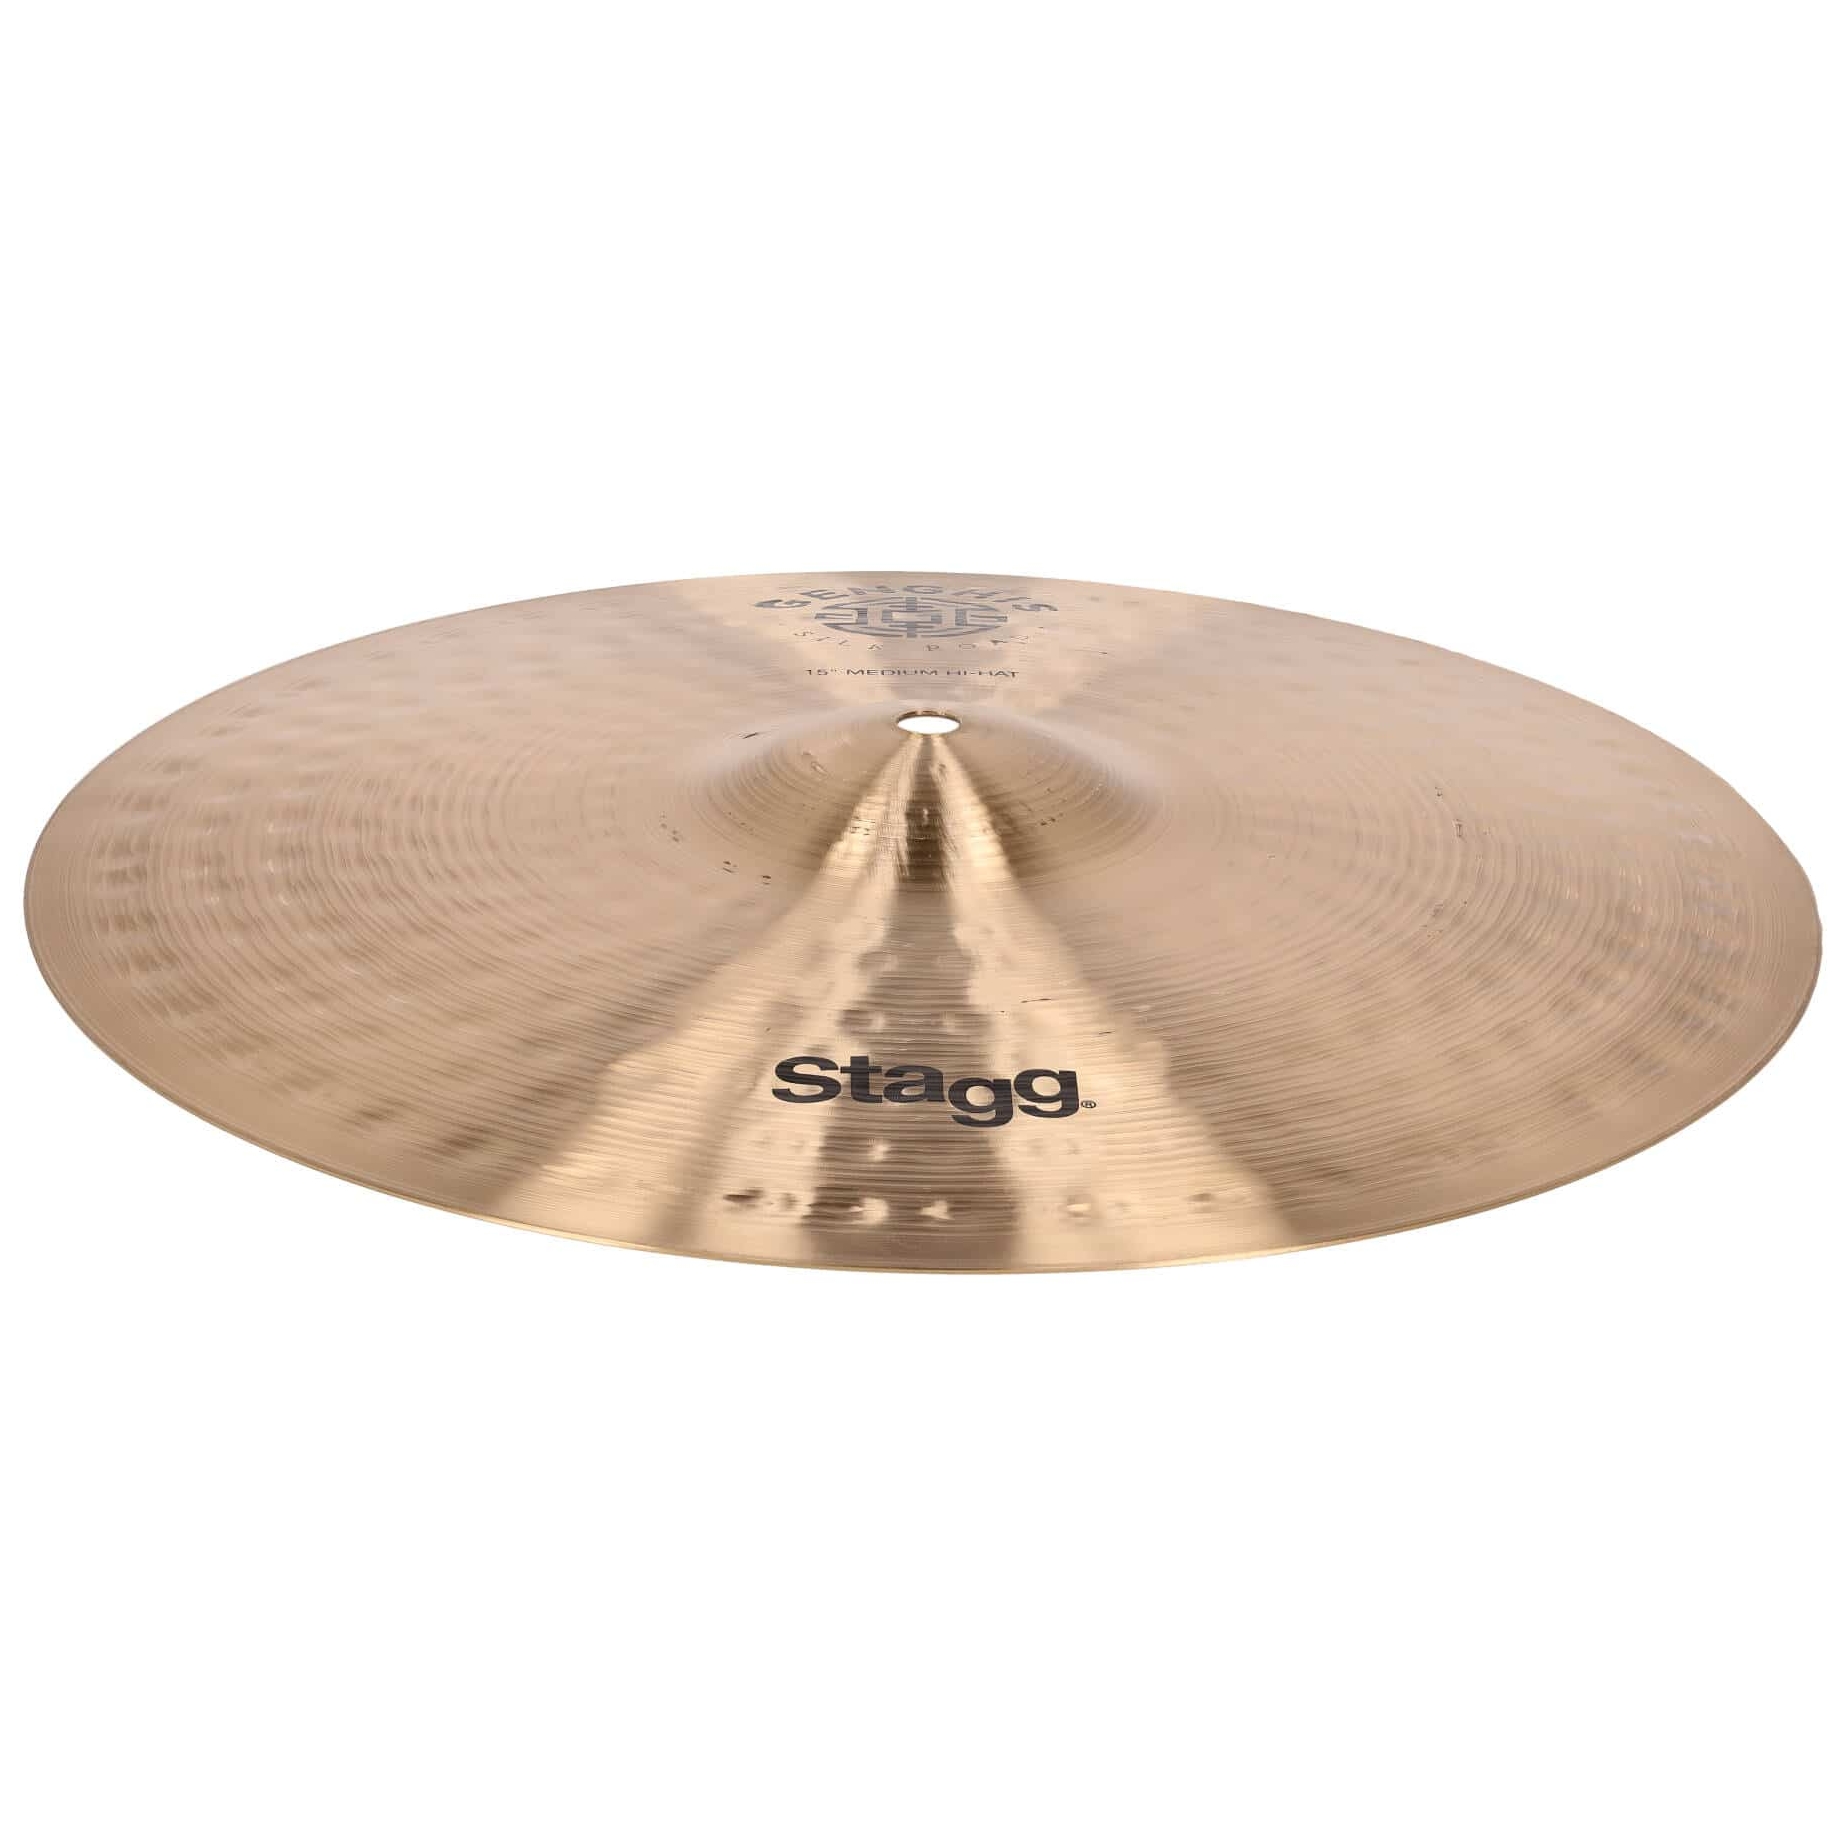 Stagg Genghis Classic Series Hi-Hat - 15 Zoll